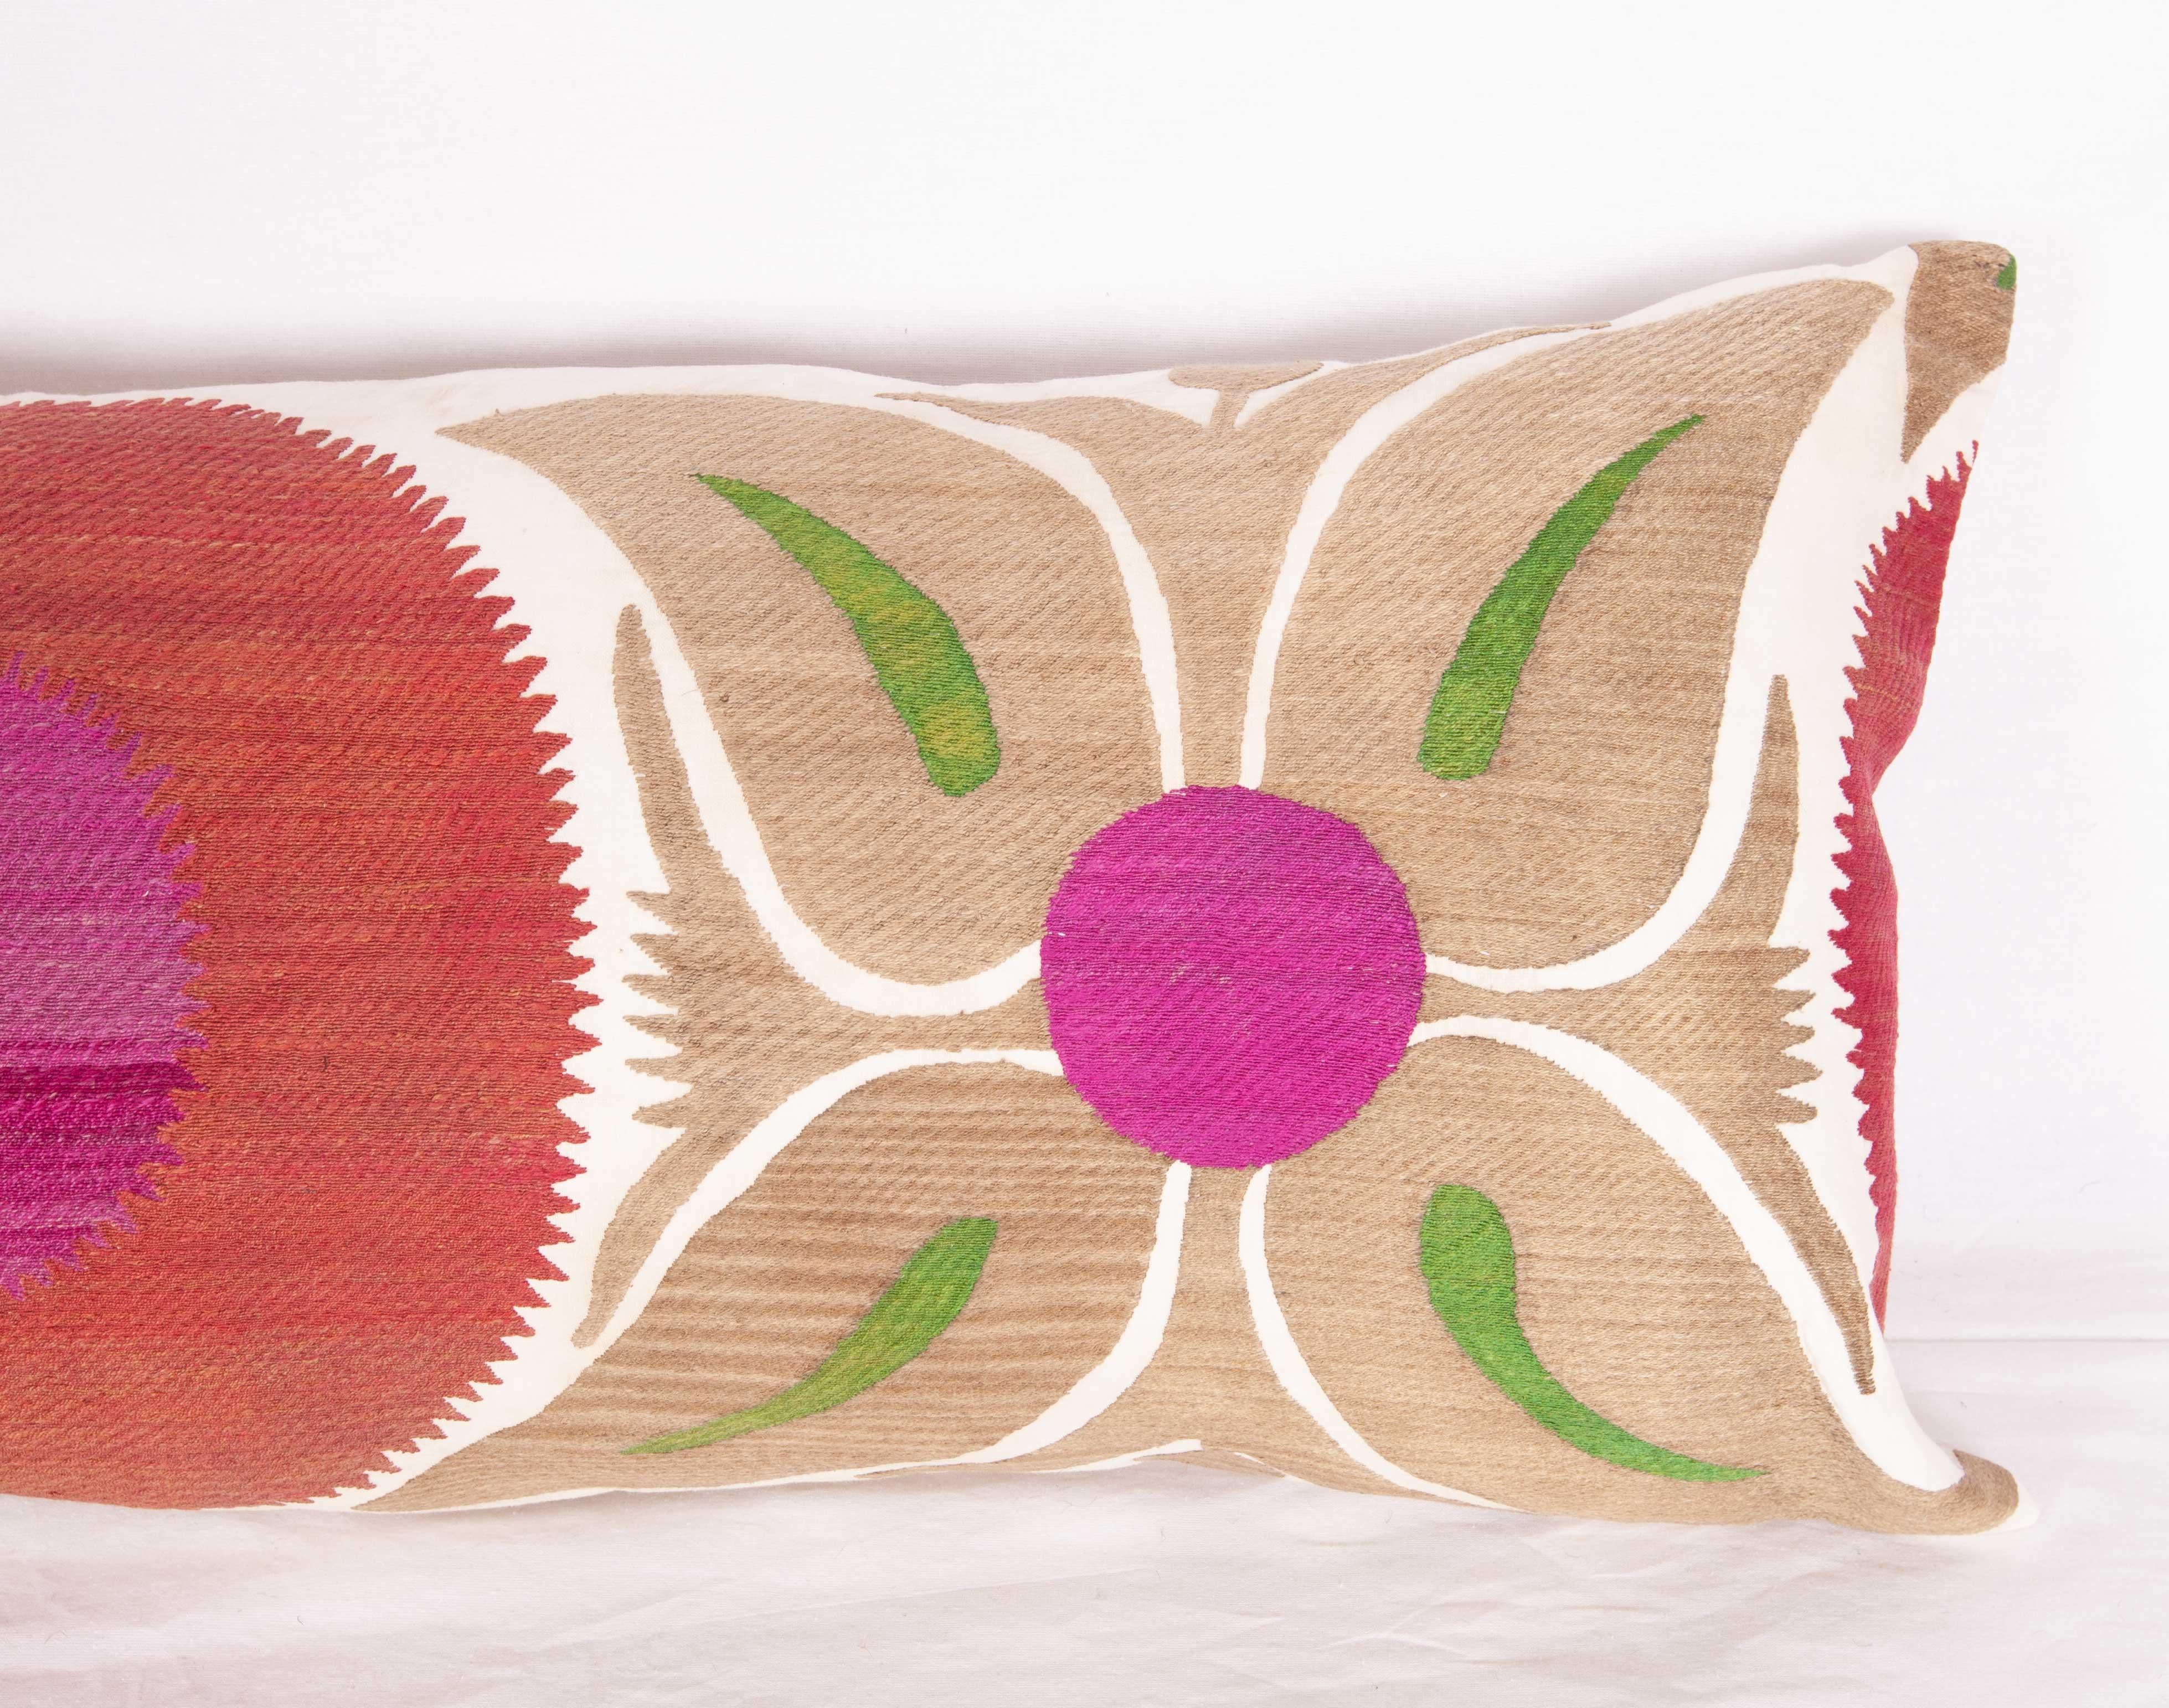 Embroidered Old Suzani Pillow / Cushion Cover Fashioned from a Mid-20th Cenury Suzani